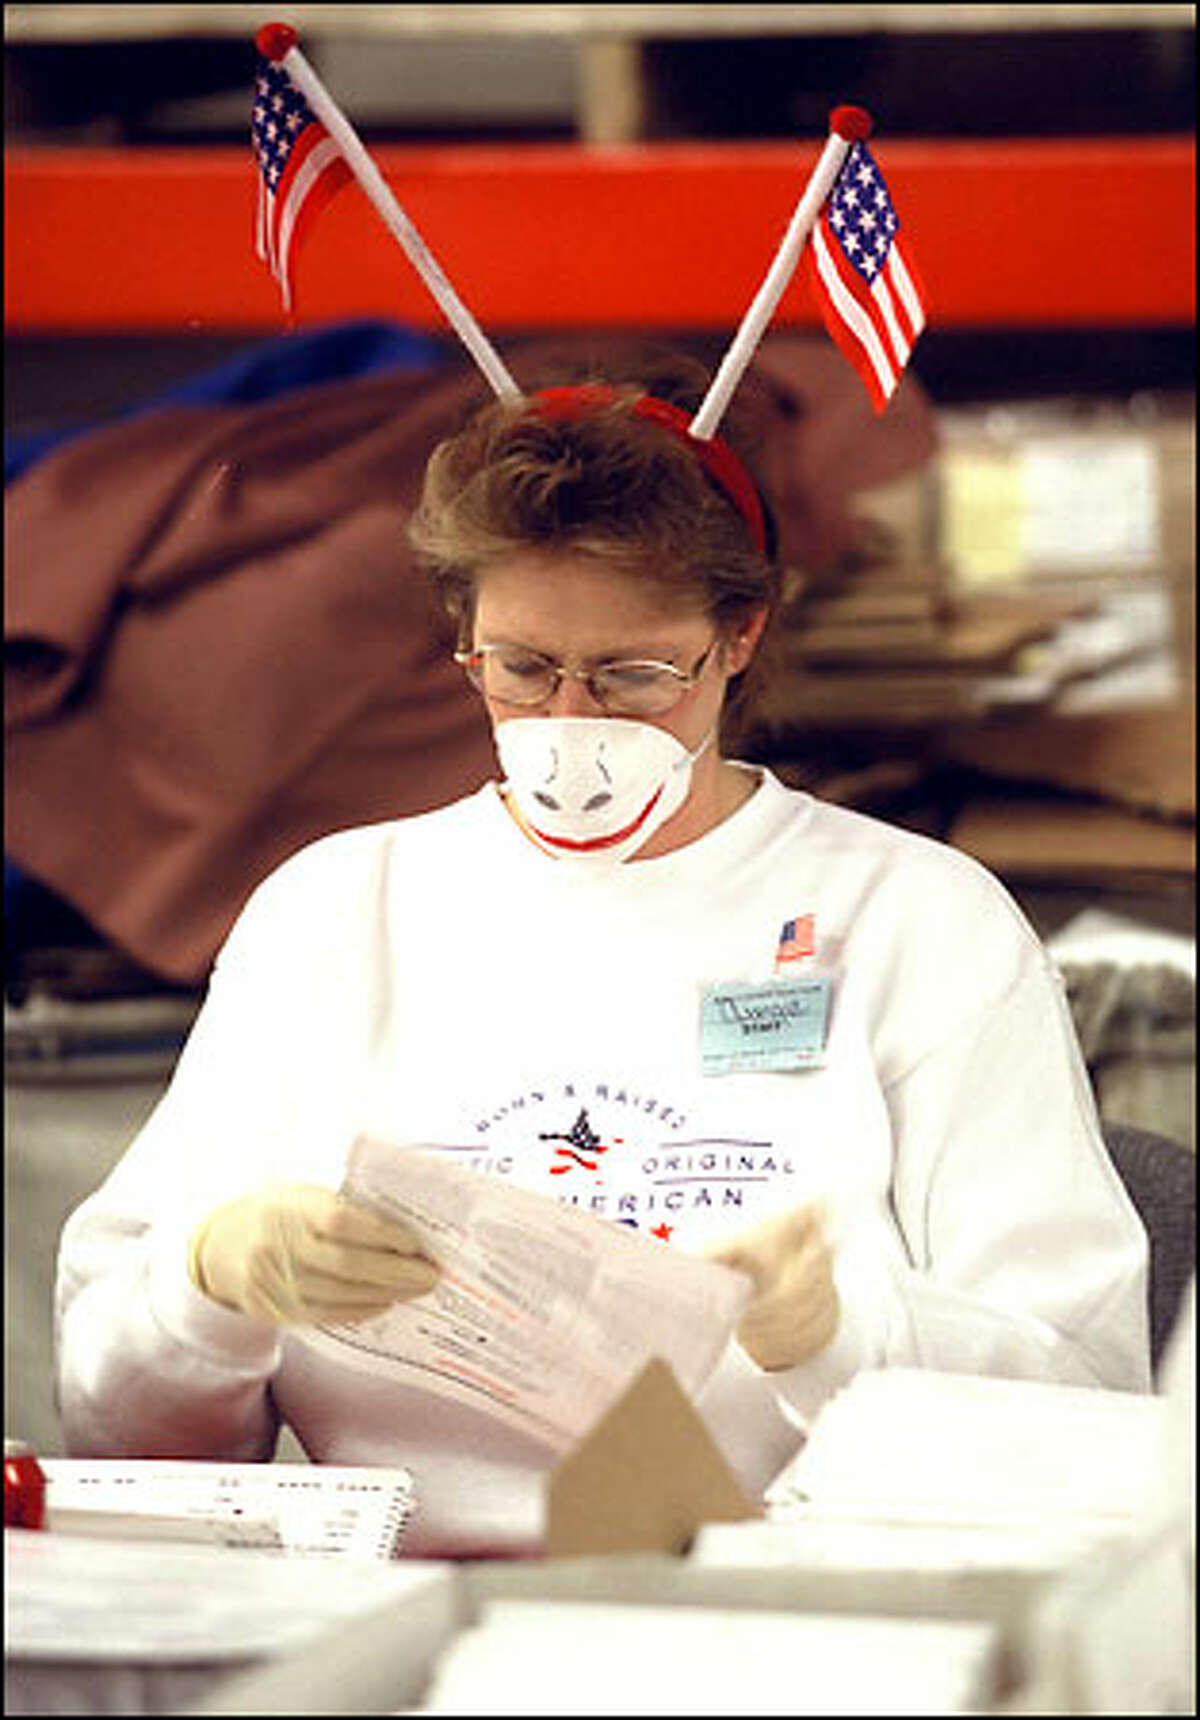 At the Mail Ballot Operation site in South Seattle, Georgia White makes the best out of having to wear a mask and surgical gloves because of anthrax concerns. White and her colleagues were the first to open and inspect mail in ballots for yesterday’s election.